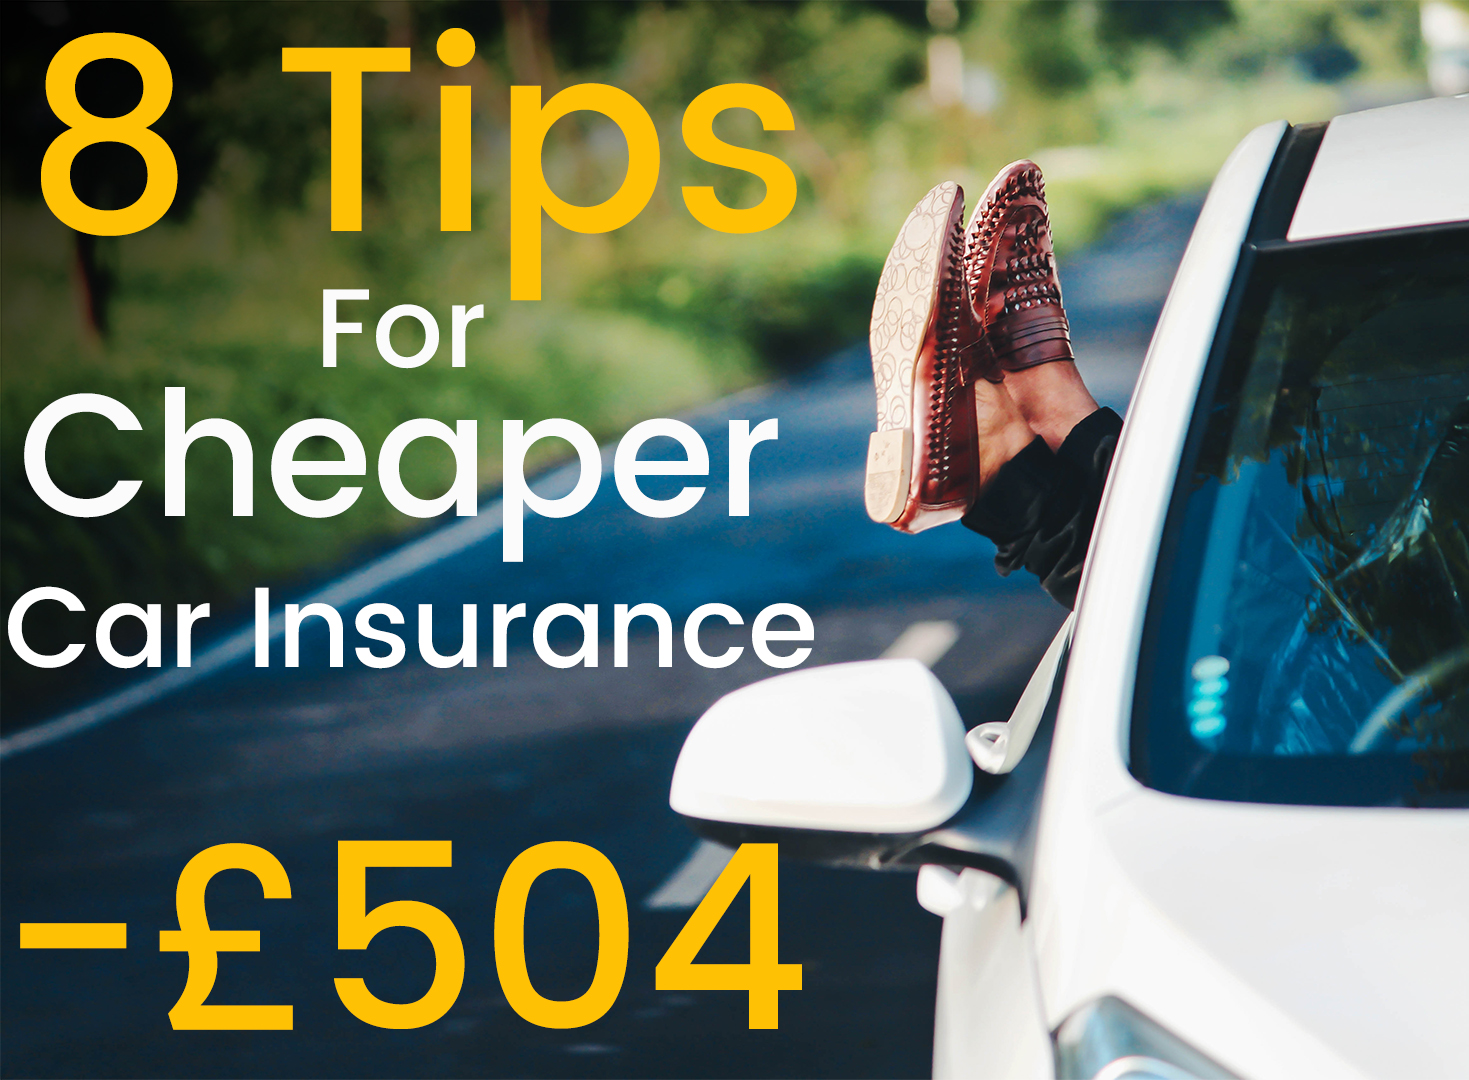 12 Simple Steps Reduced My Car Insurance By 12% (In Only 12 Minutes